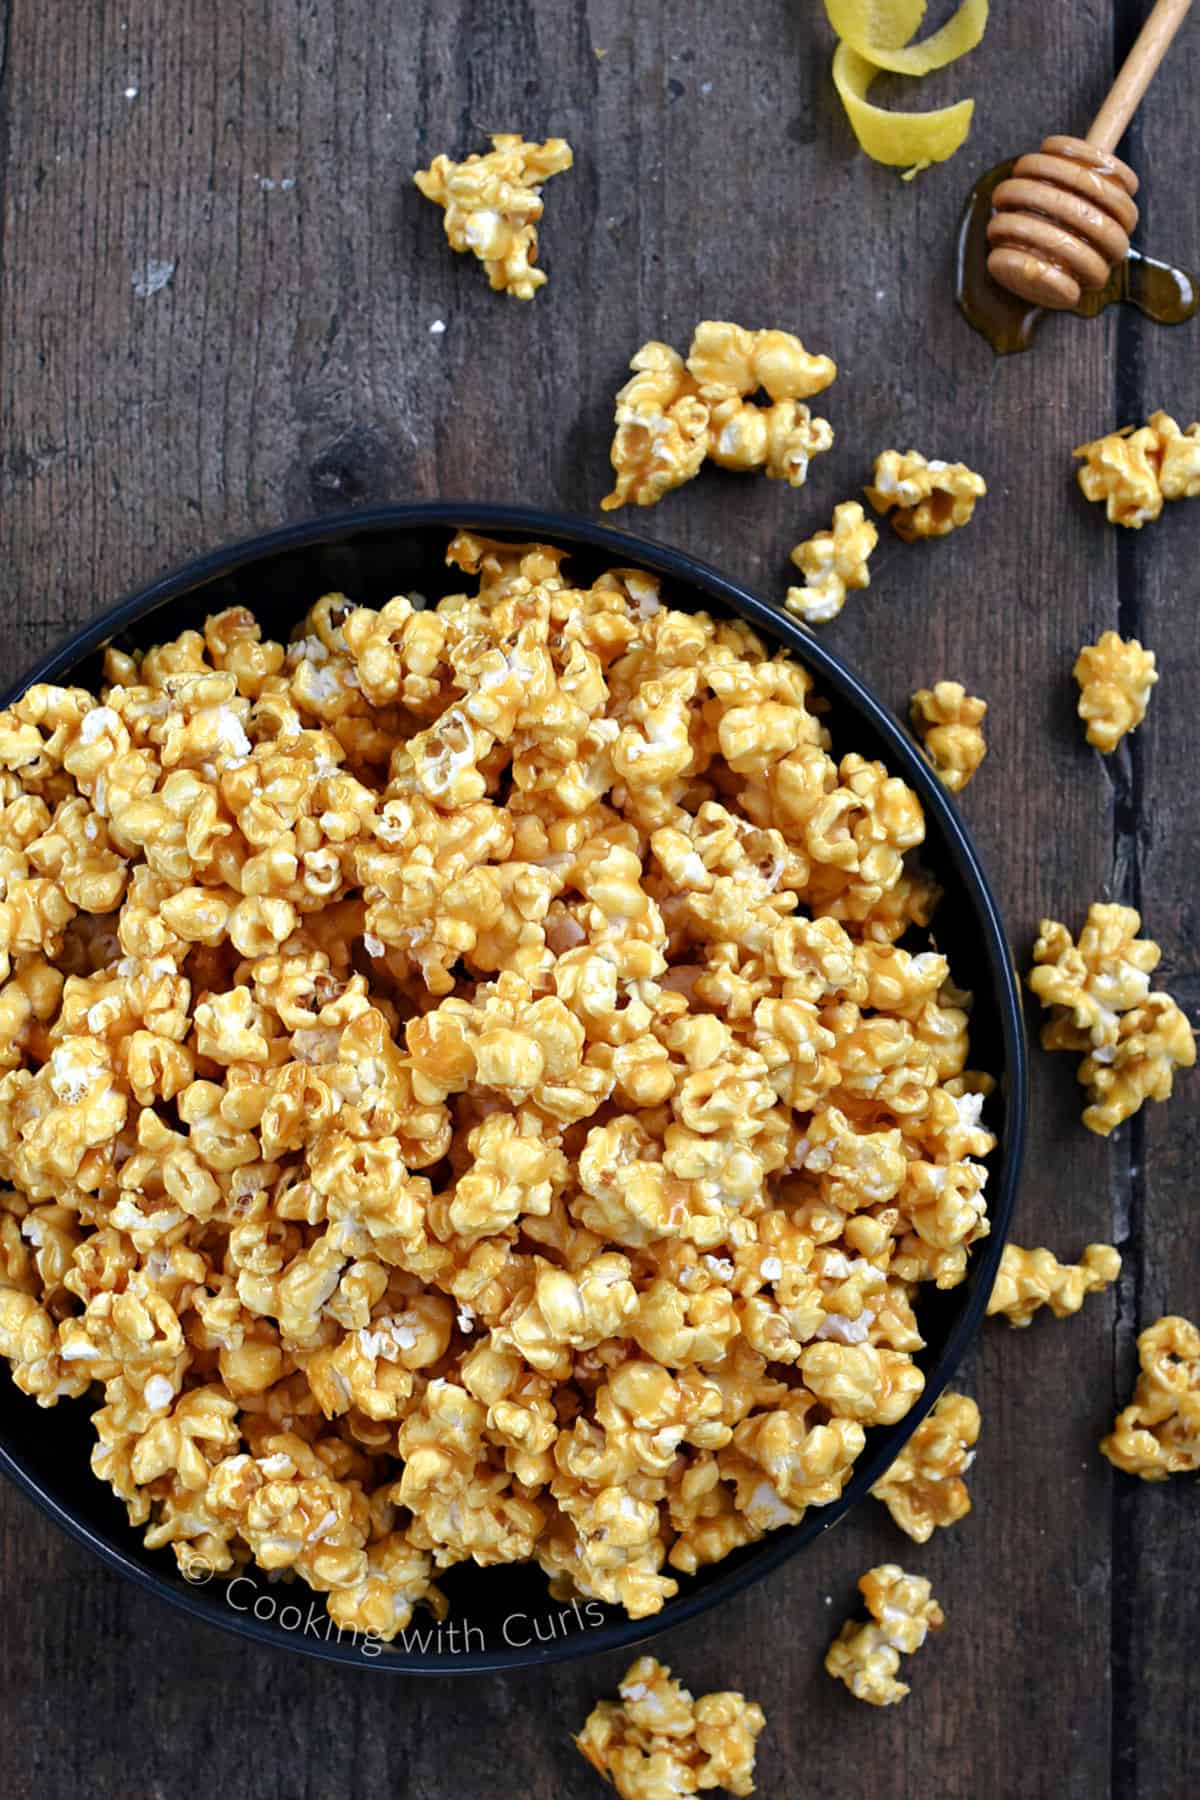 Looking down on a large bowl of caramel popcorn with spilled popcorn, honey and lemon rinds in the background. 